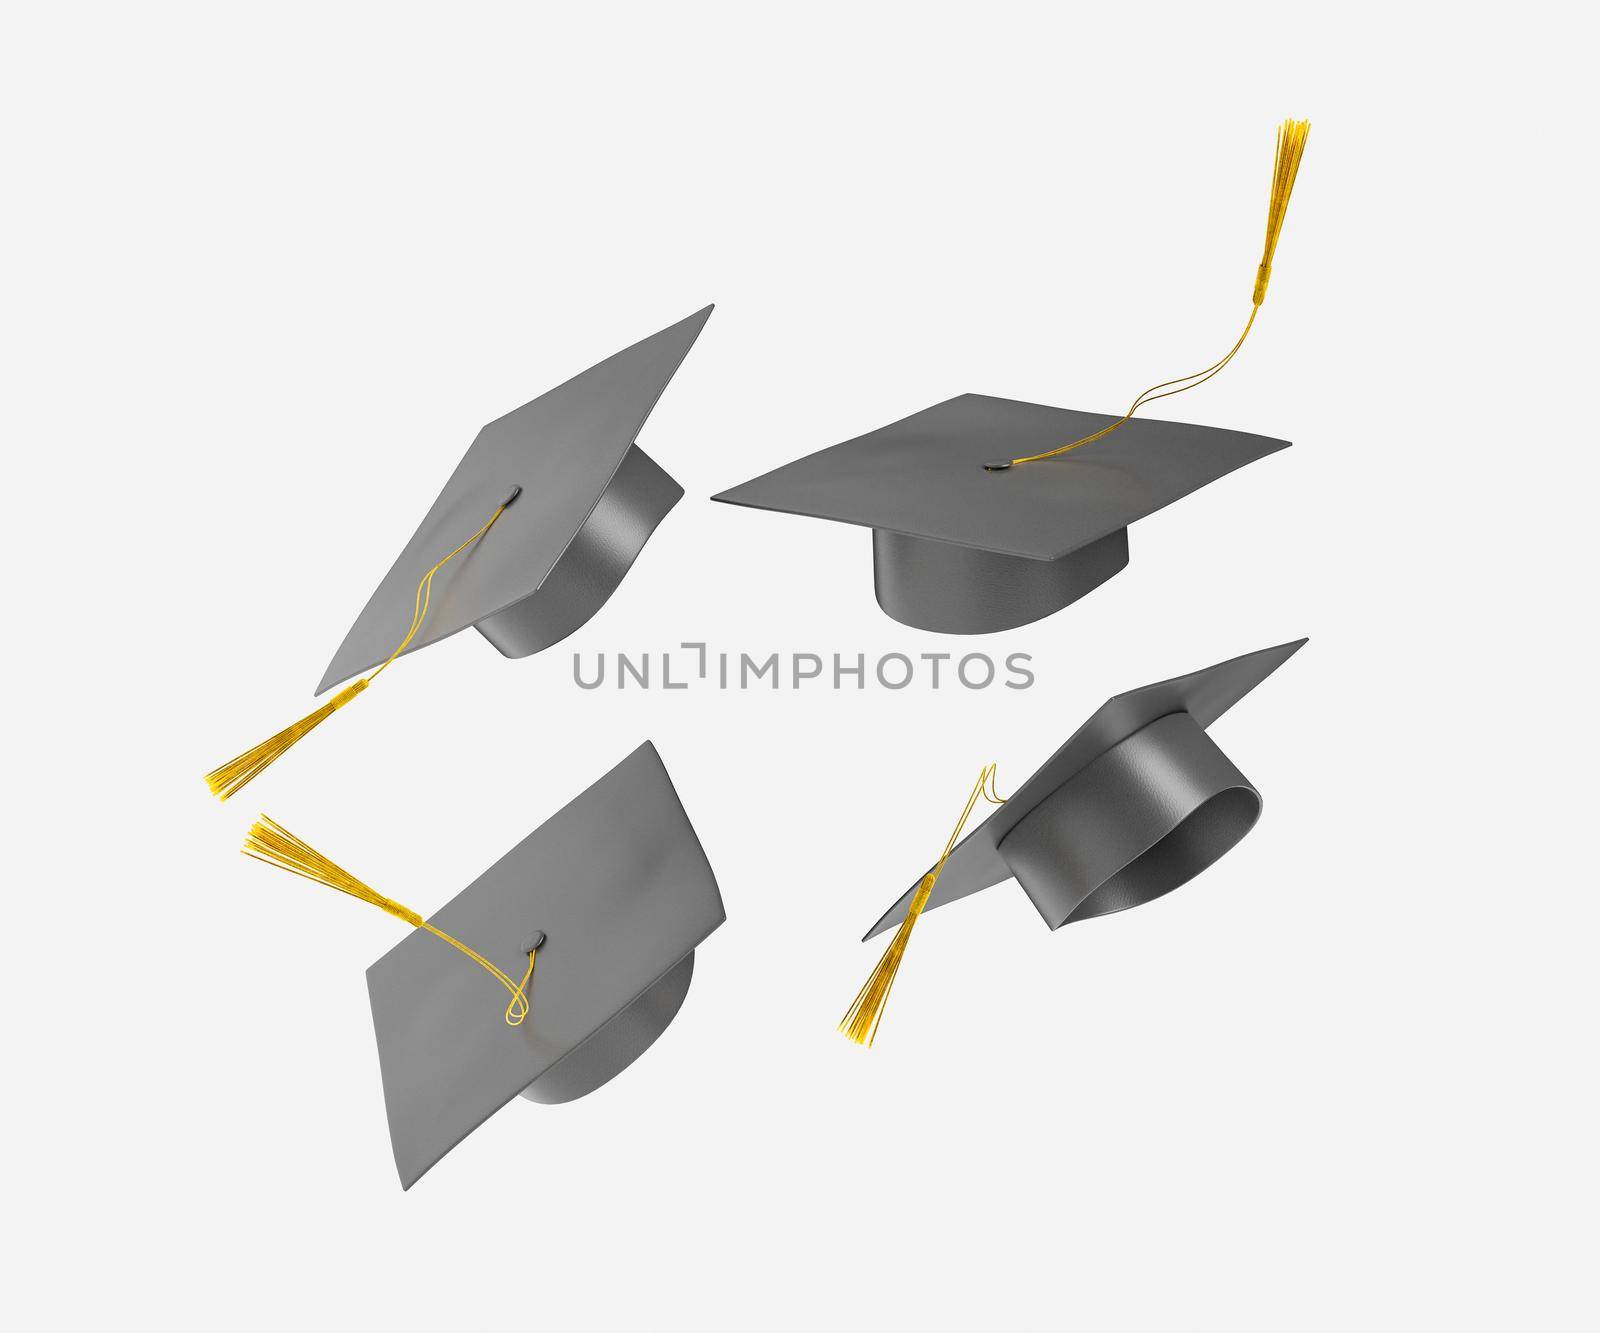 3d illustration of flying graduation caps during celebration by asolano